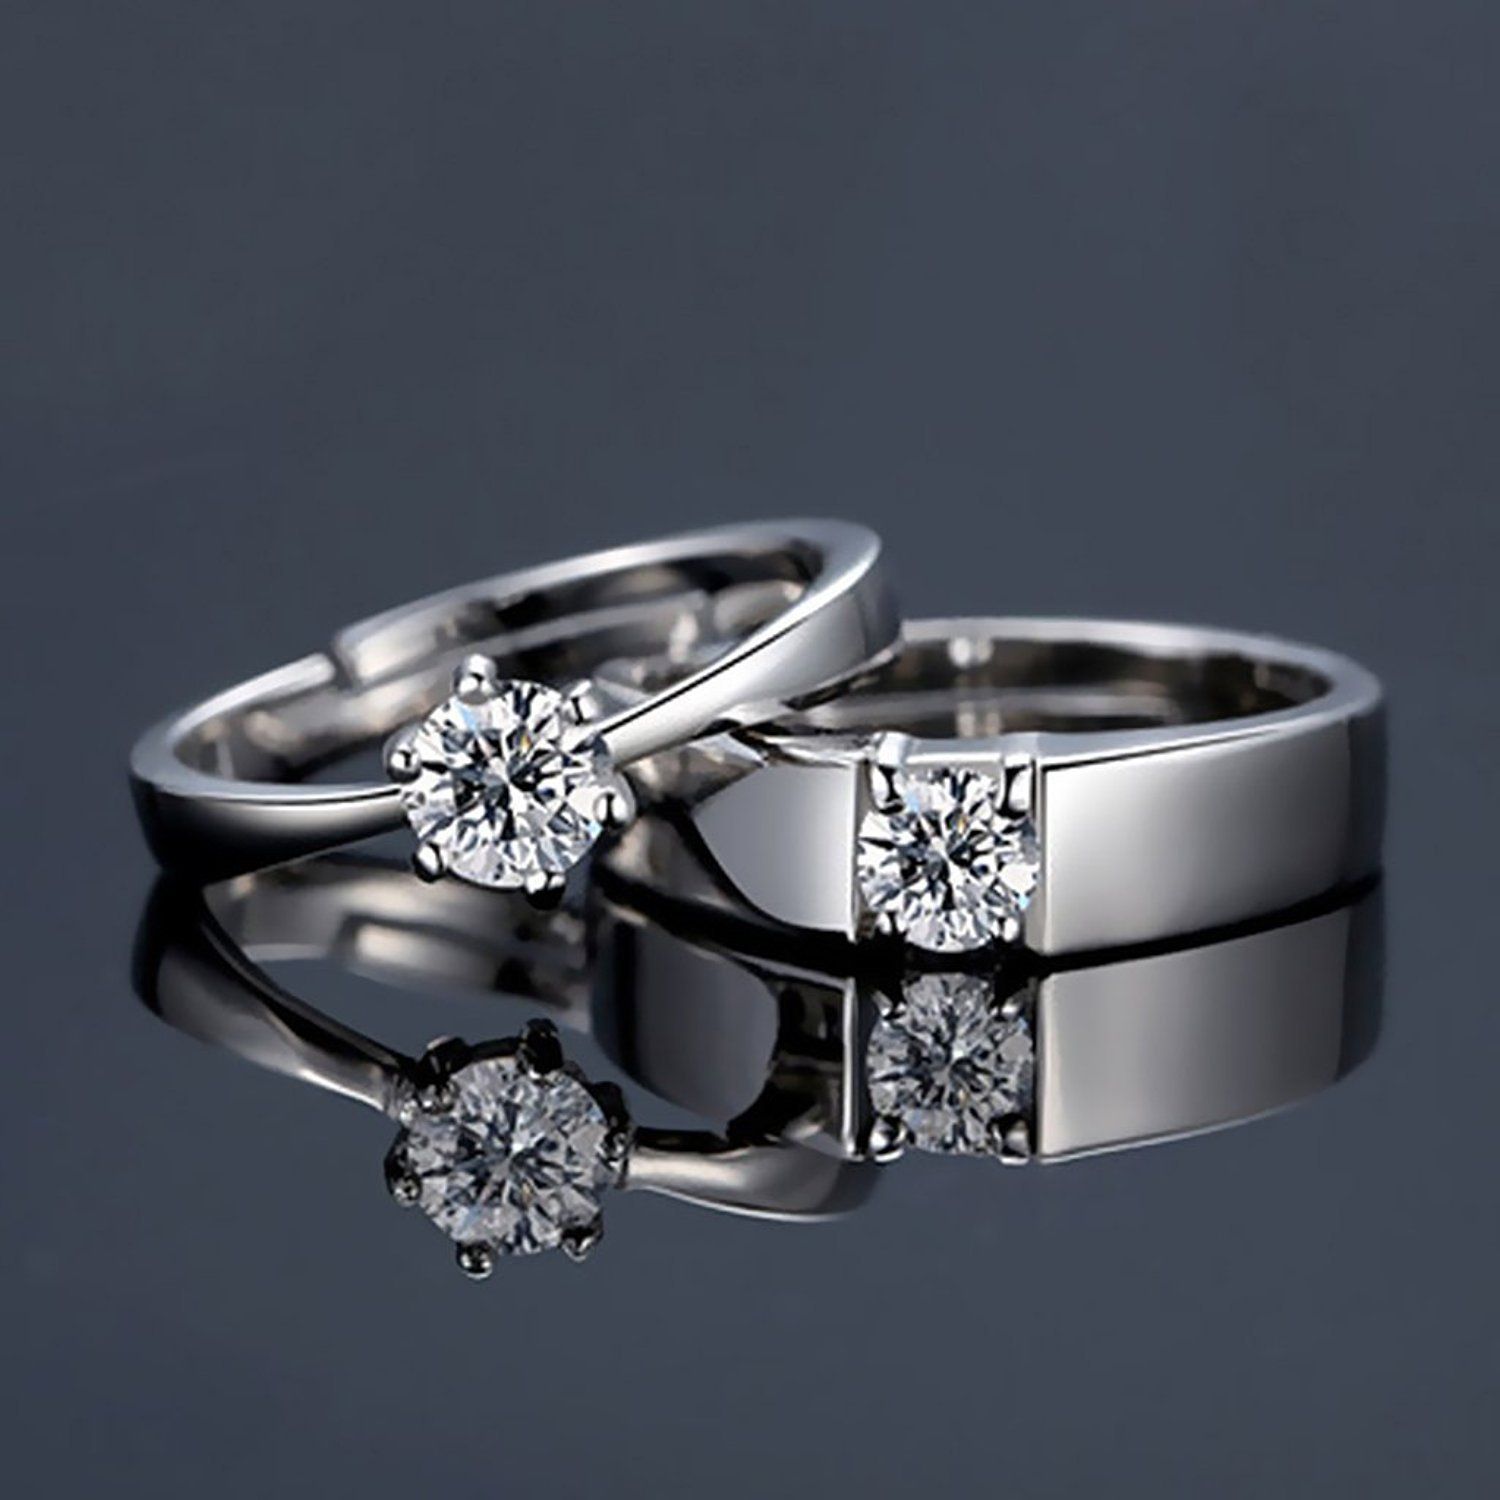 Share more than 157 couple rings silver super hot